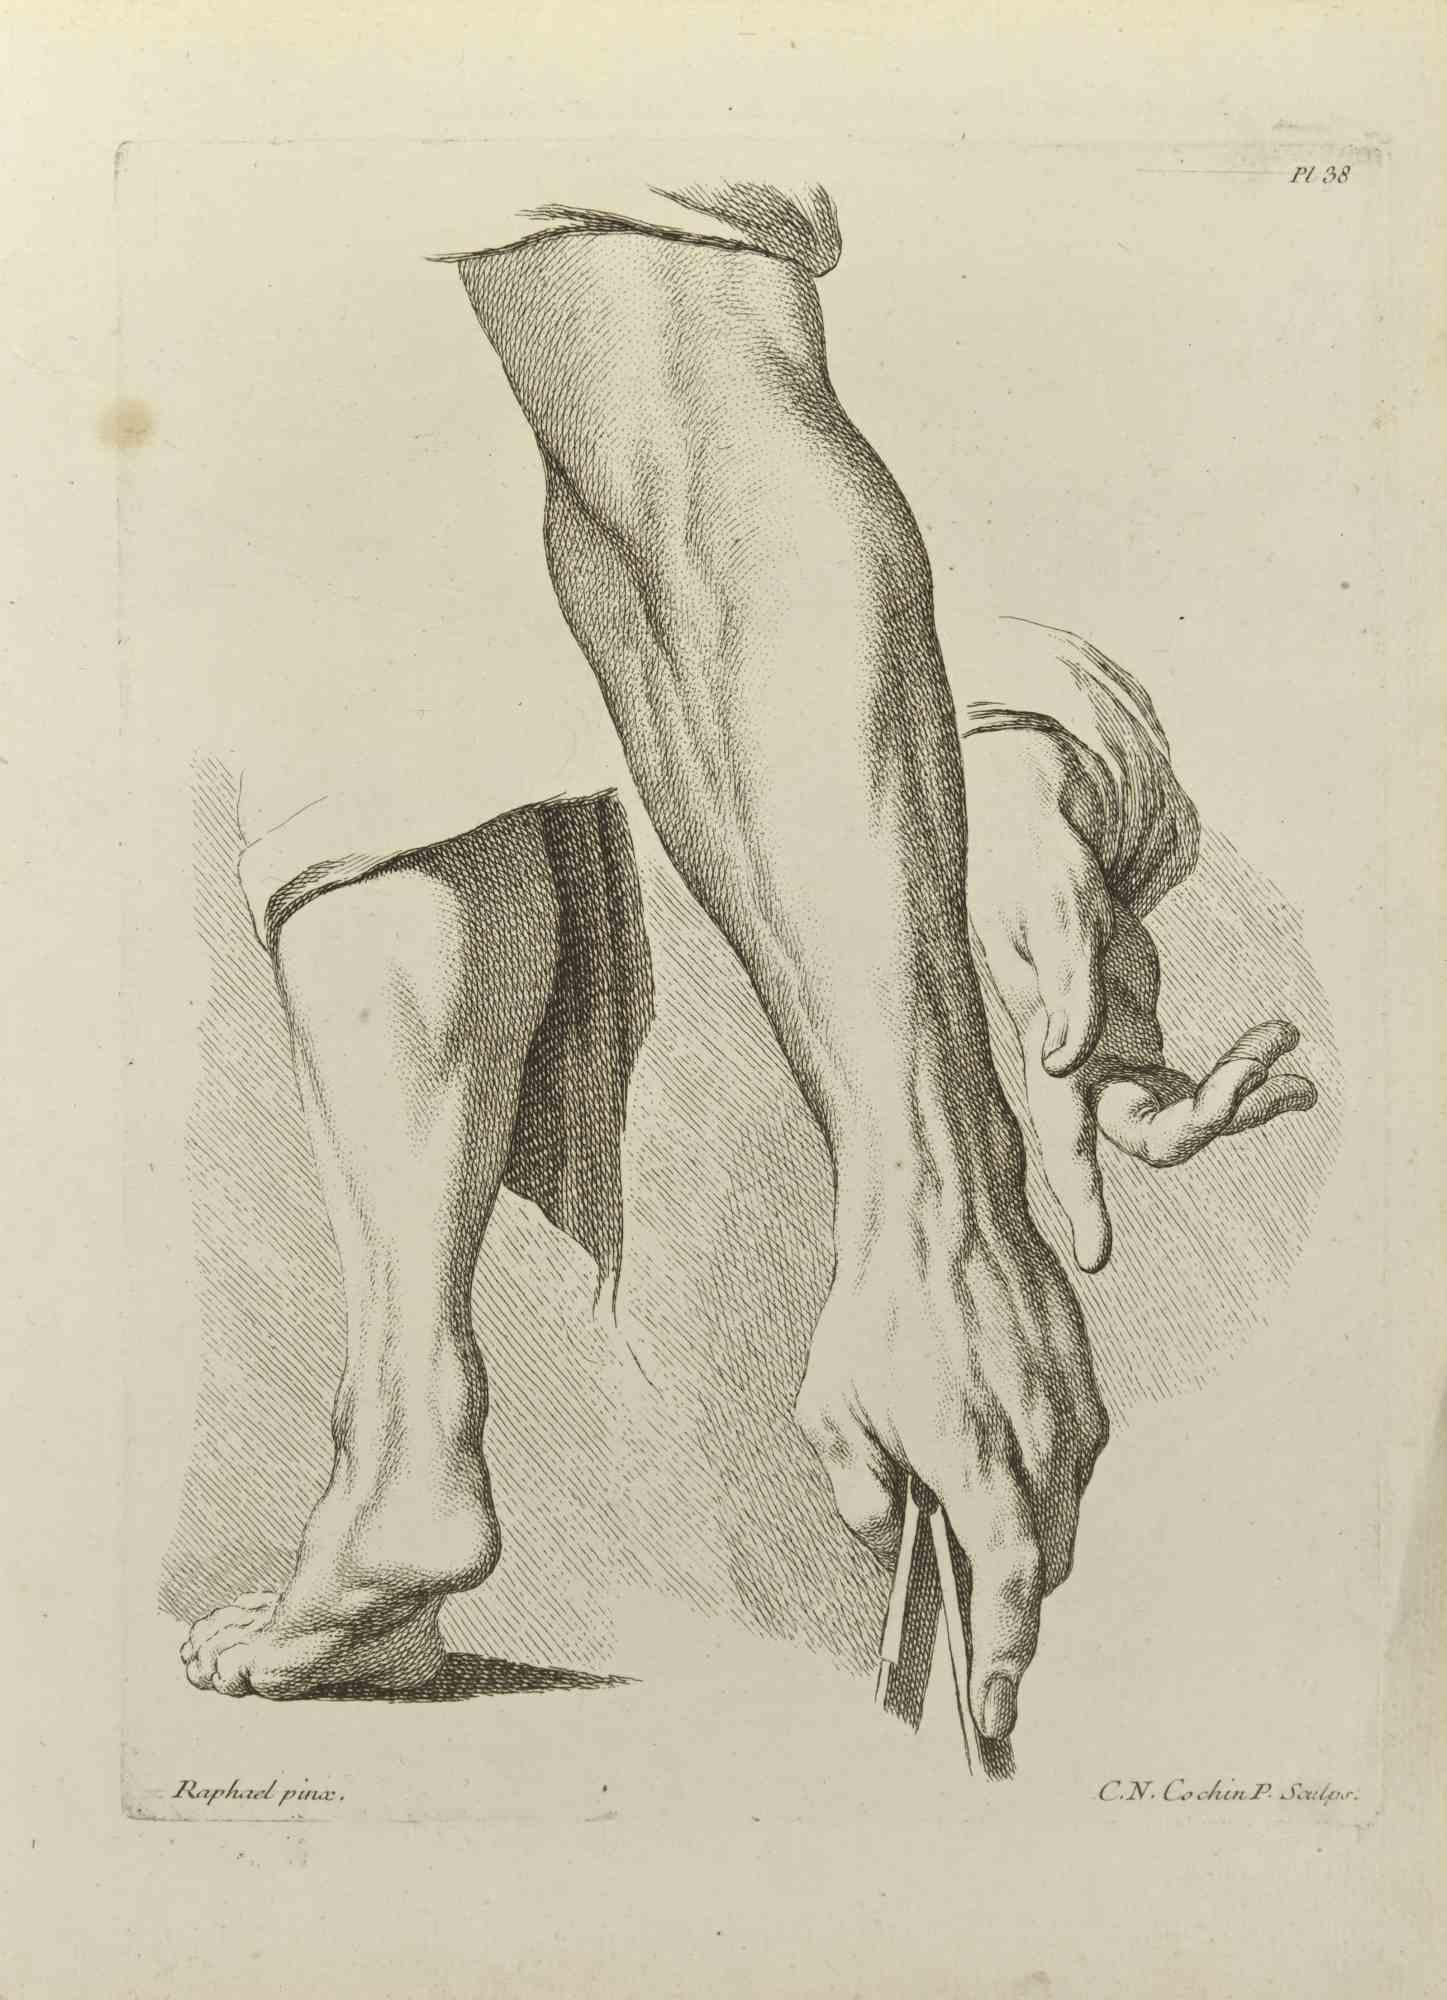 Anatomy Studies is an etching realized by Nicholas Cochin in 1755.

Good conditions with slight folding and foxing.

Signed in the plate.

The artwork is depicted through confident strokes.

The etching was realized for the anatomy study “JOMBERT,